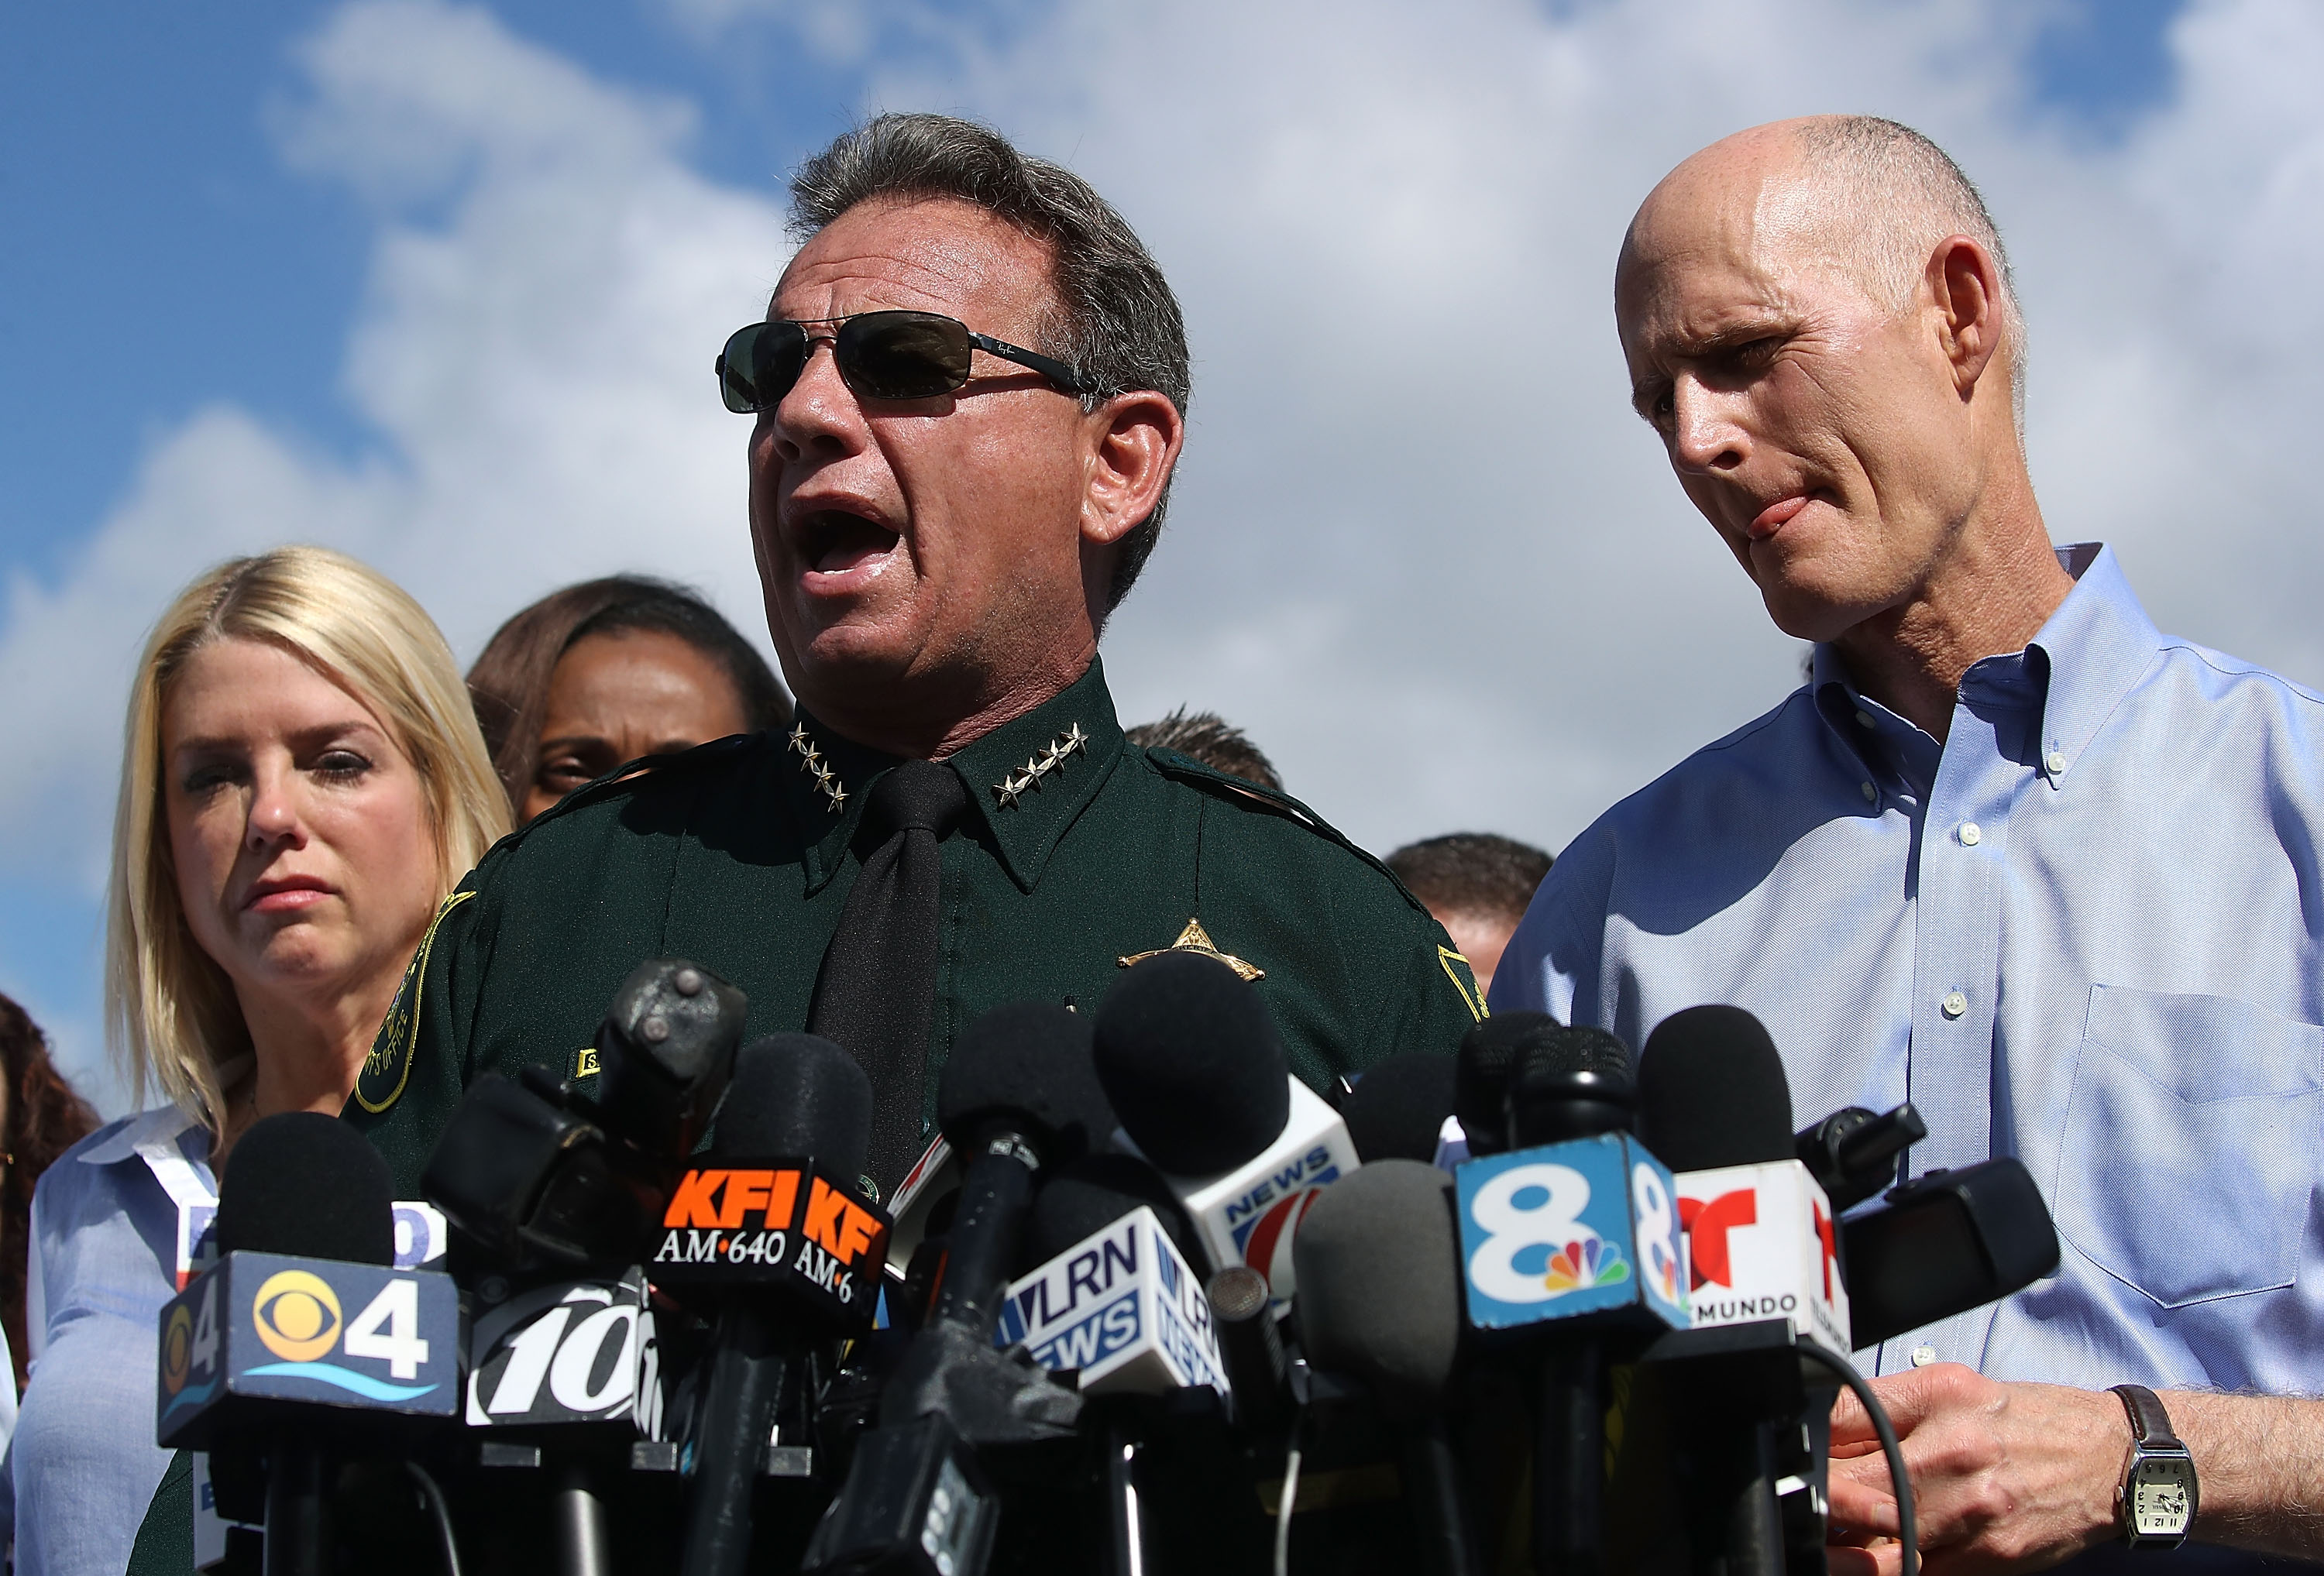 PARKLAND, FL - FEBRUARY 15: Broward County Sheriff, Scott Israel (C), Florida Governor Rick Scott,(R),and Florida Attorney General Pam Bondi,(L), speak to the media about the mass shooting at Marjory Stoneman Douglas High School where 17 people were killed yesterday, on February 15, 2018 in Parkland, Florida. Police arrested the suspect after a short manhunt, and have identified him as 19 year old former student Nikolas Cruz. (Photo by Mark Wilson/Getty Images)